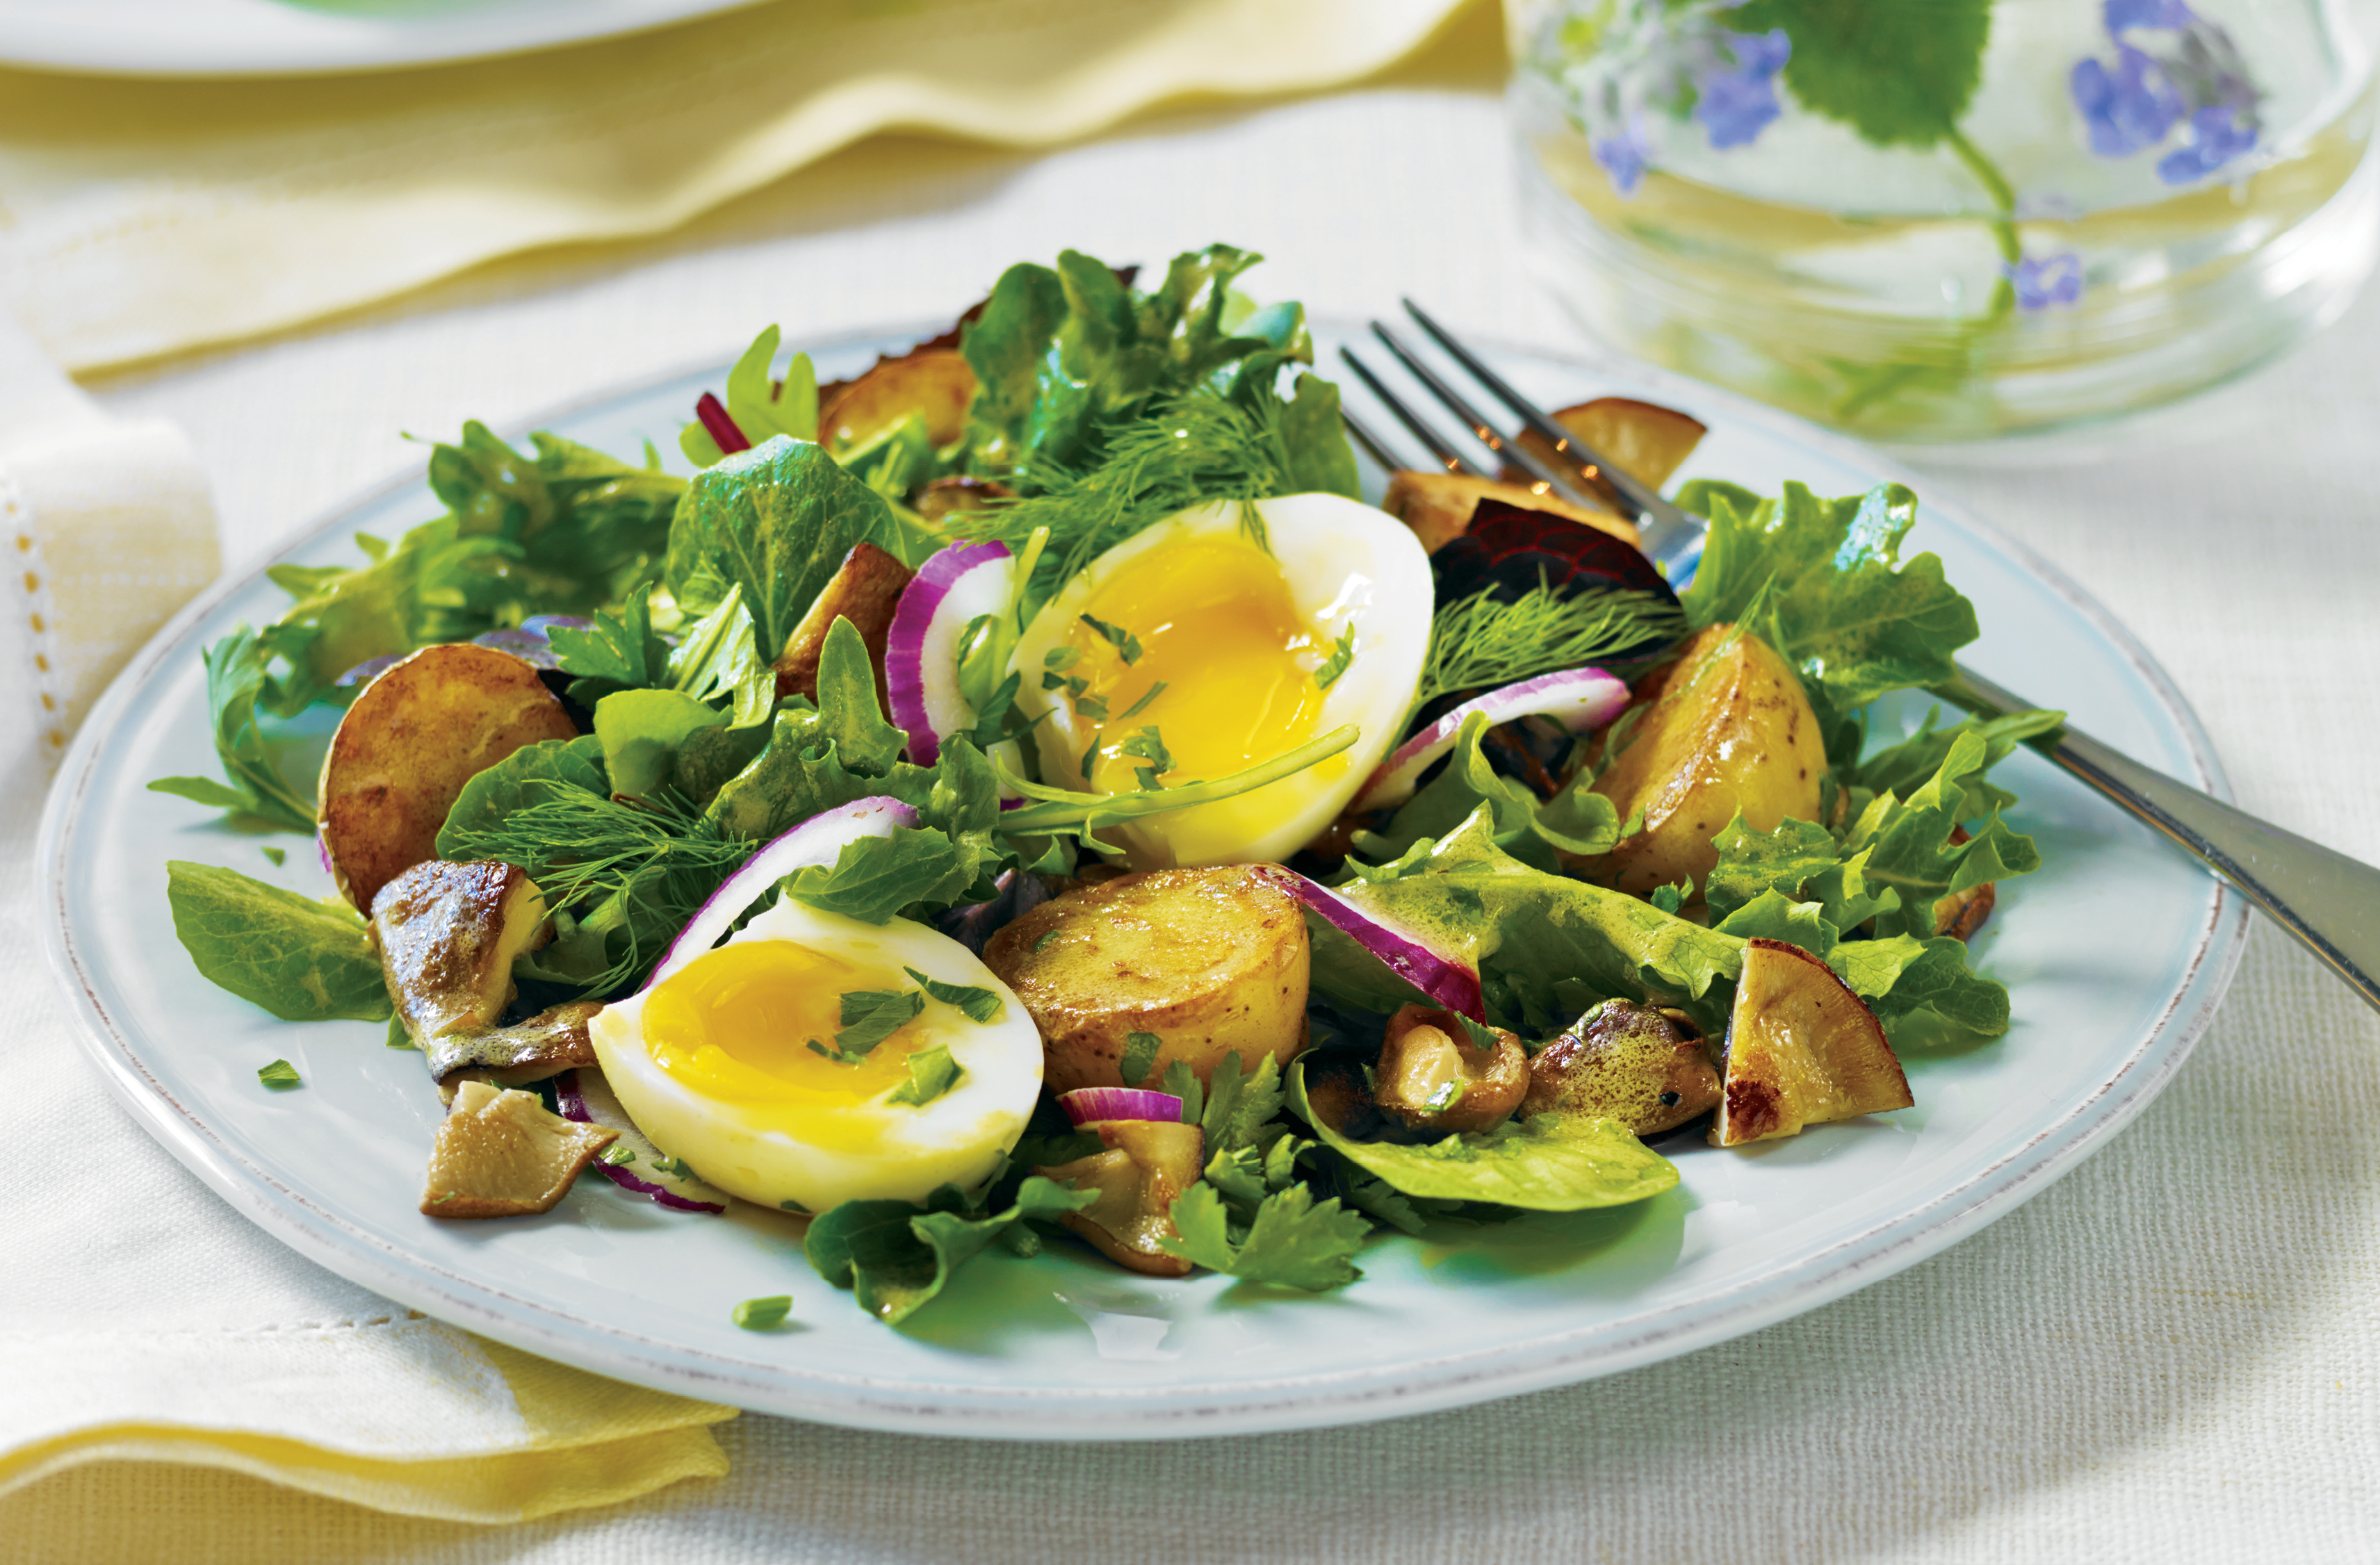 Field greens with red onion, fried mini potatoes, mushrooms & boiled eggs
